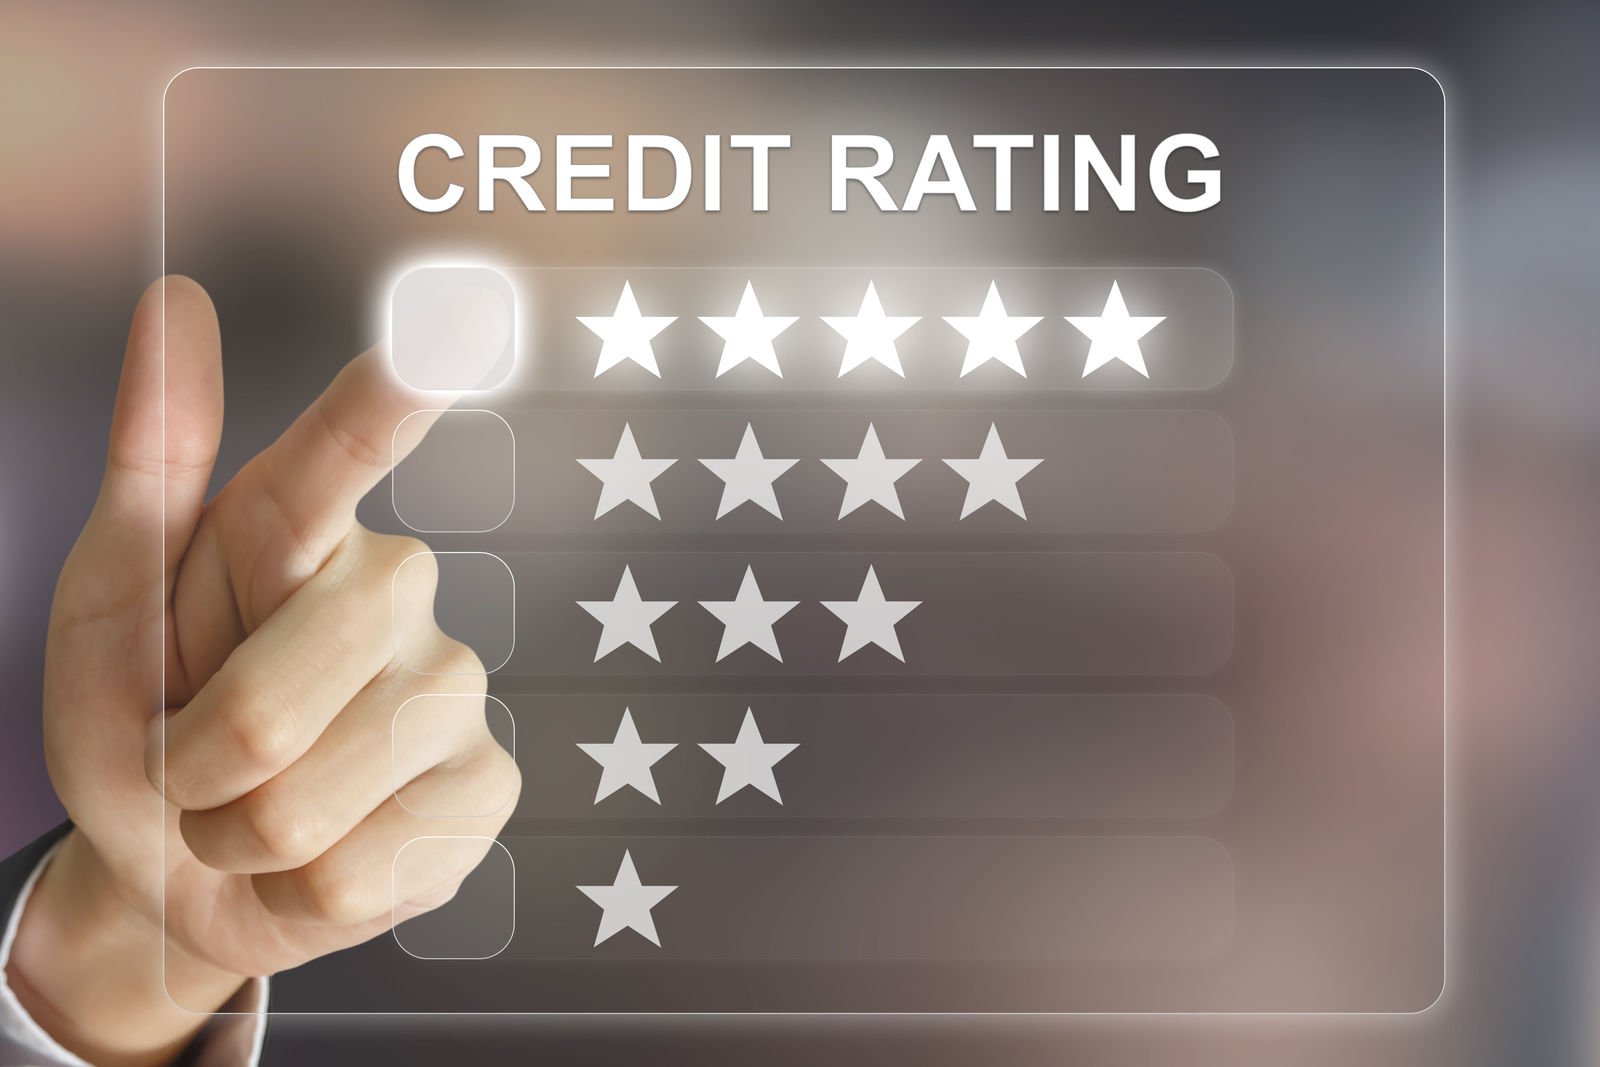 Why do auto insurance companies use a credit score?